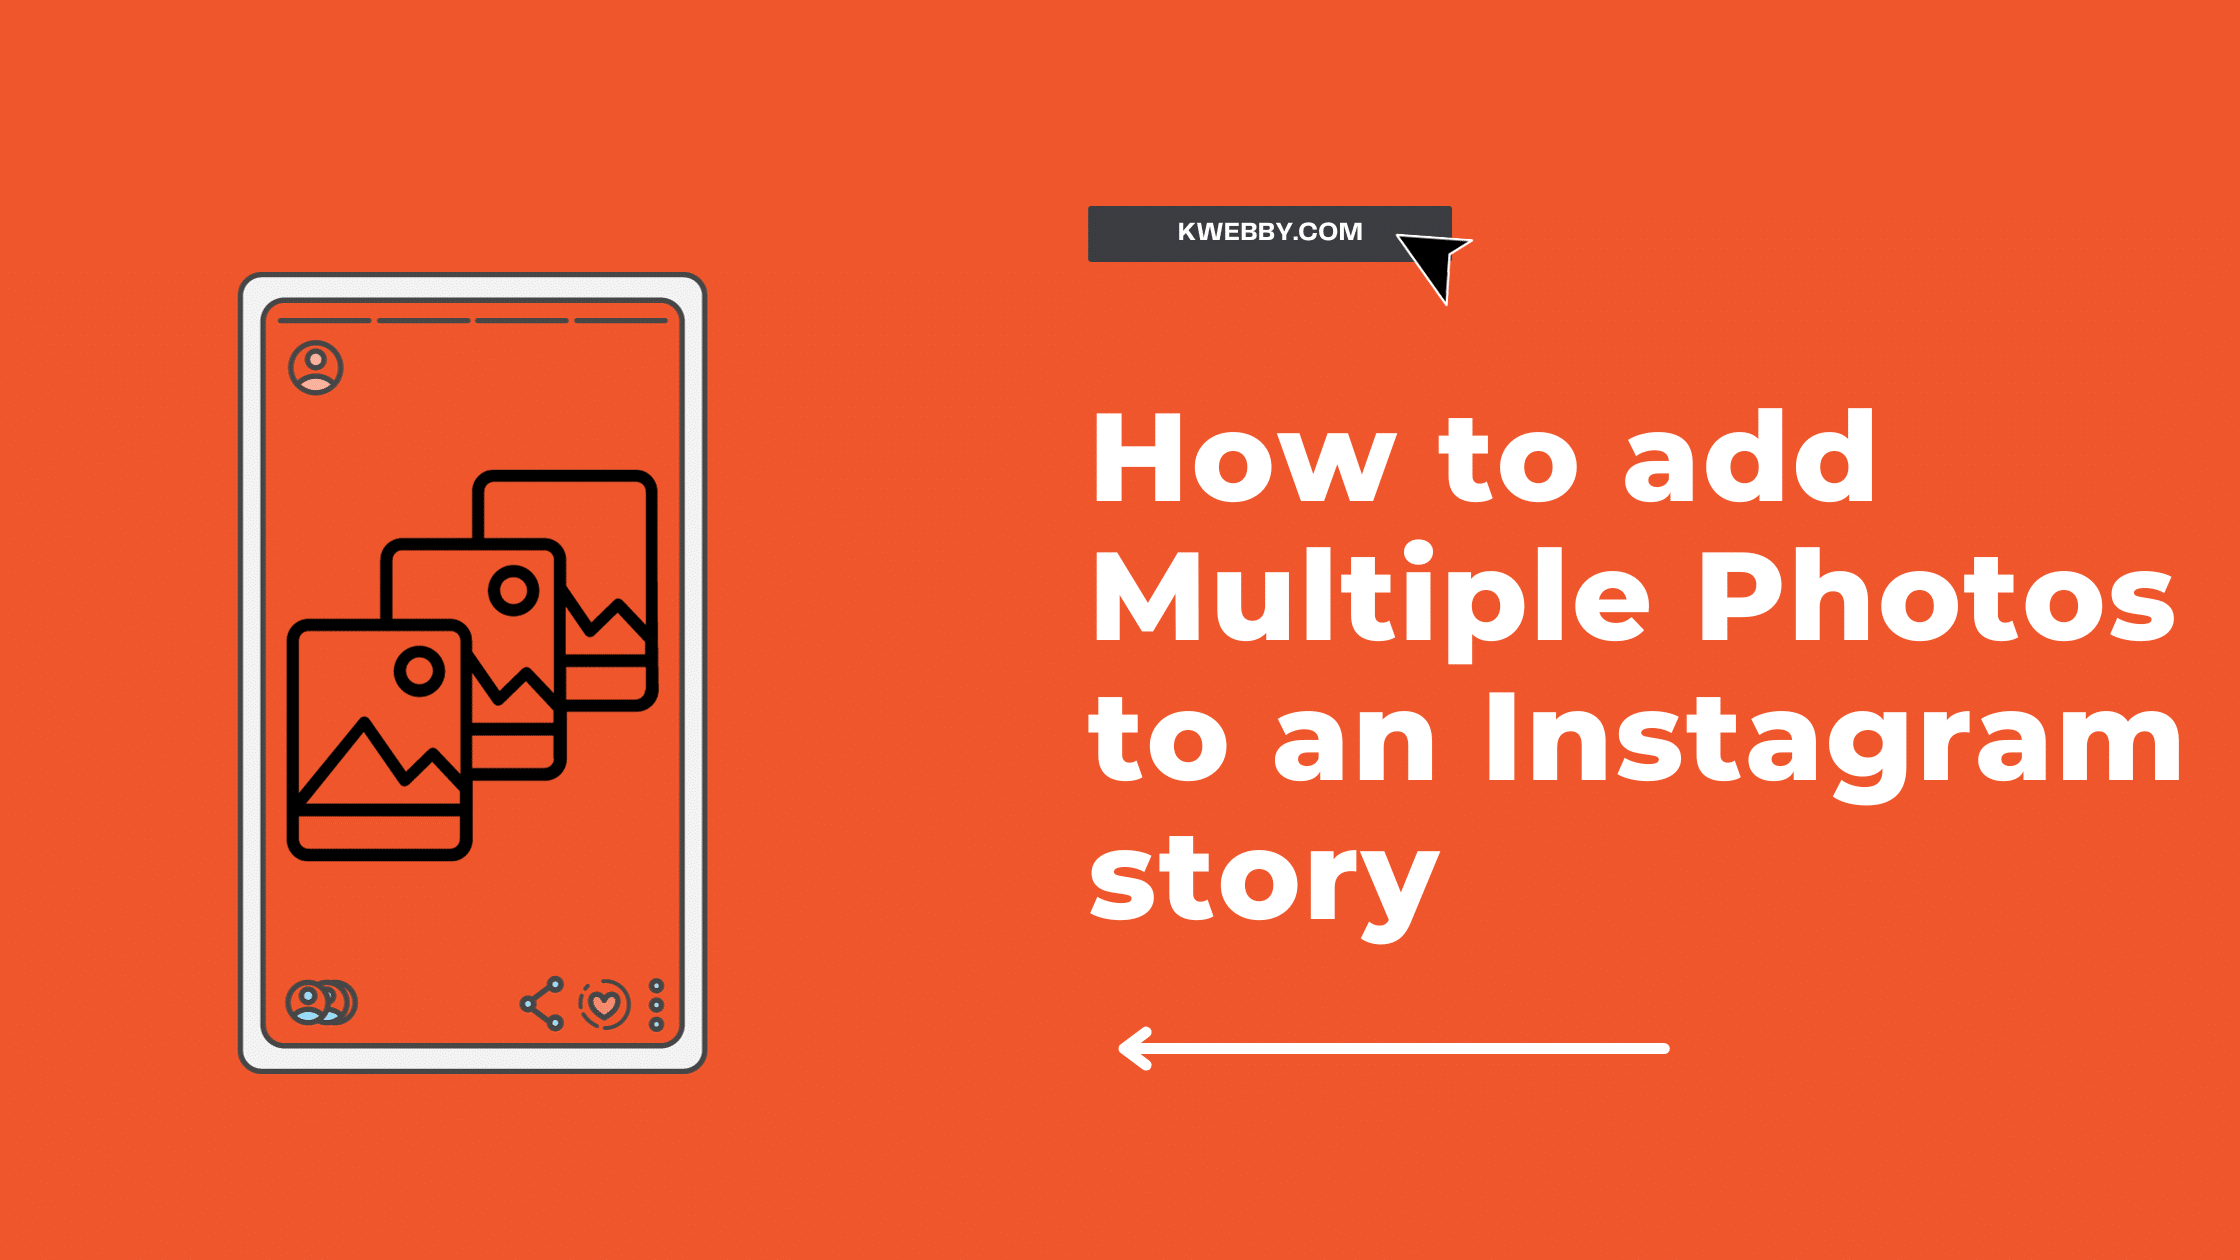 How to add Multiple Photos to an Instagram story